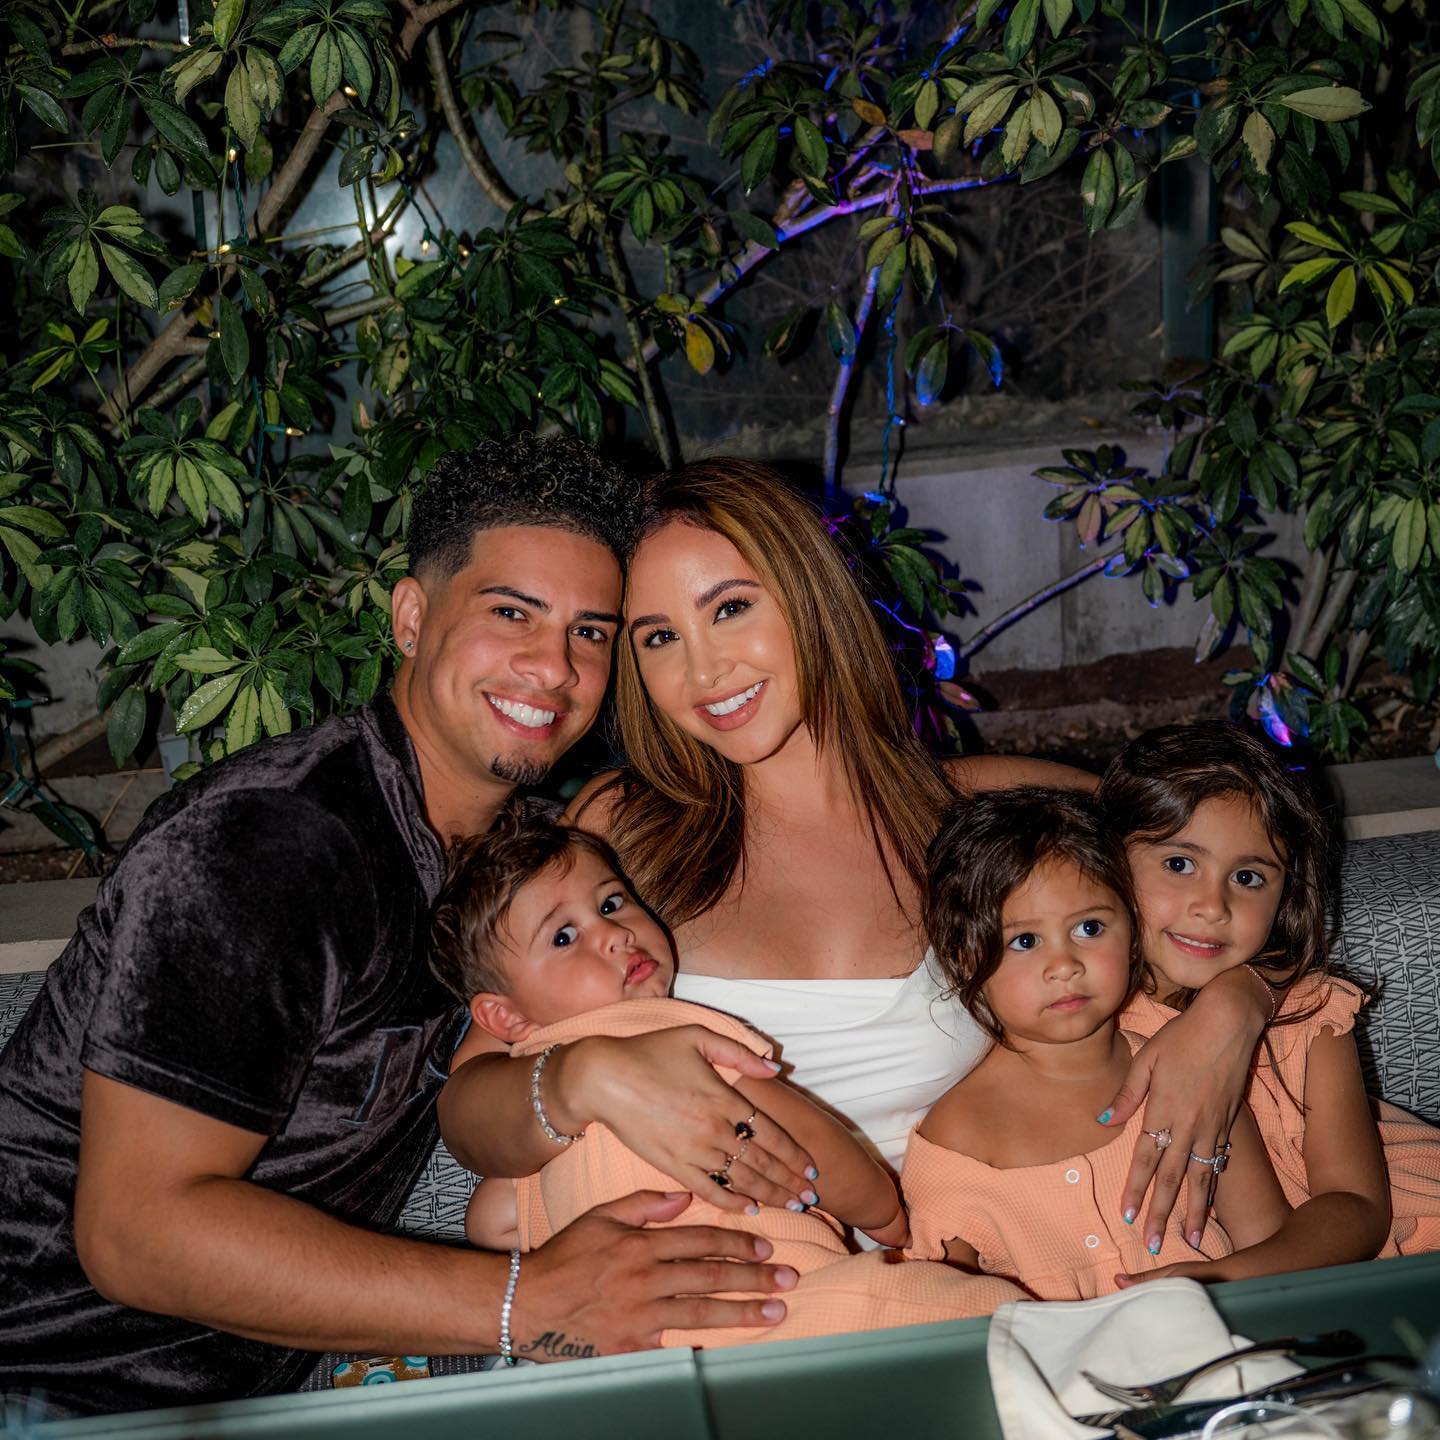 The ACE Family is splitting up, with Catherine Paiz and Austin McBroom announcing their divorce and vowing to amicably coparent their three kids, Elle, Alaia, and Steel